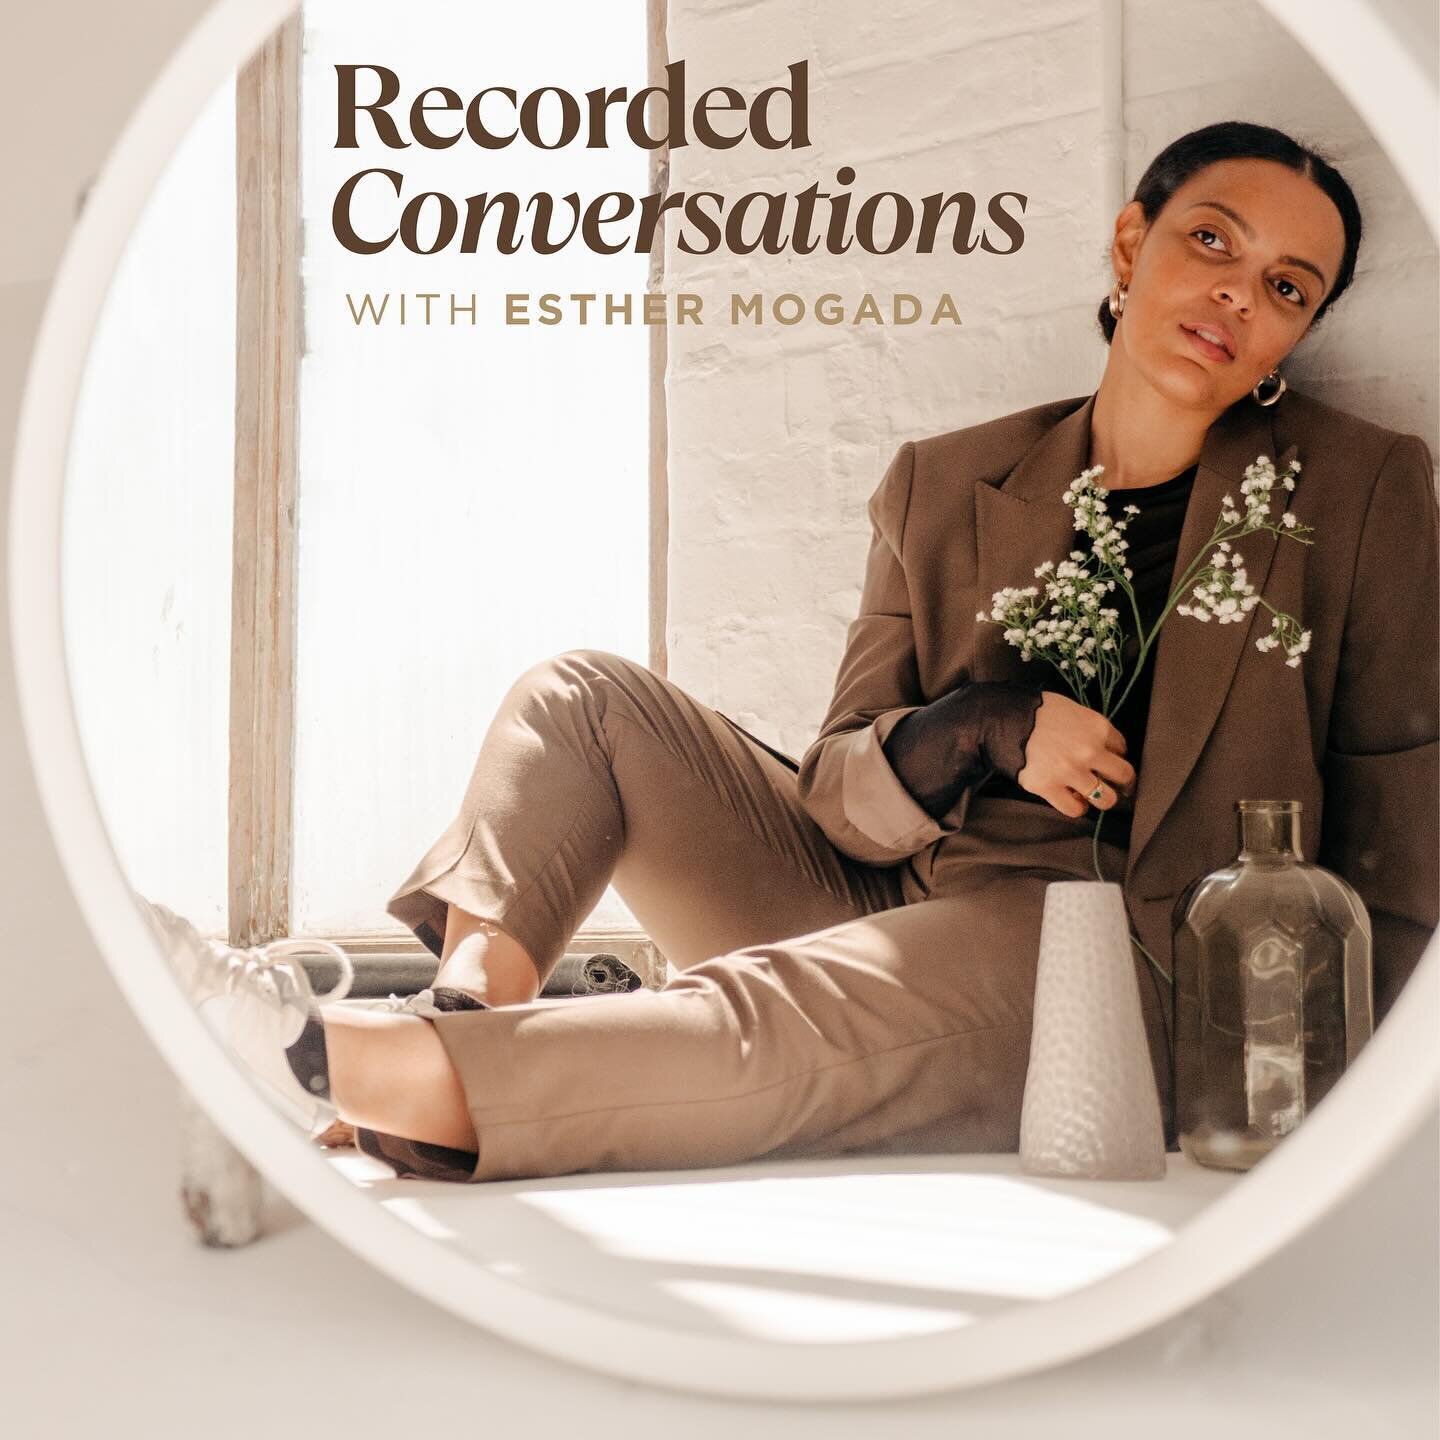 After 10 years in the making, I&rsquo;m finally launching my very own podcast called Recorded Conversations. 

For as long as I can remember, I&rsquo;ve had a deep passion for have conversations with people &amp; hearing about their life. 

I was alw